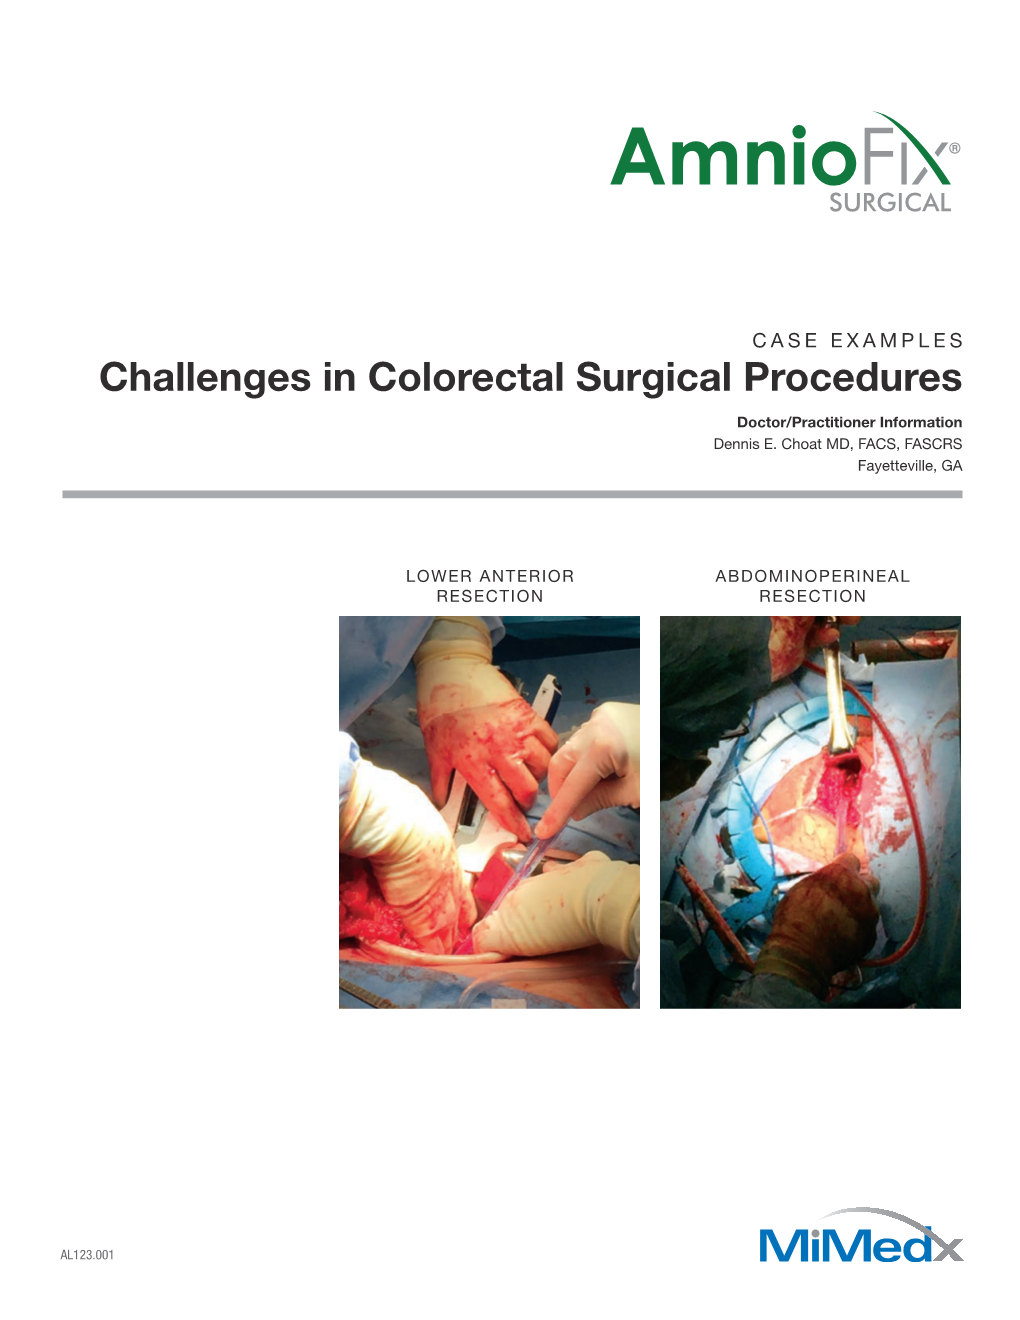 Challenges in Colorectal Surgical Procedures